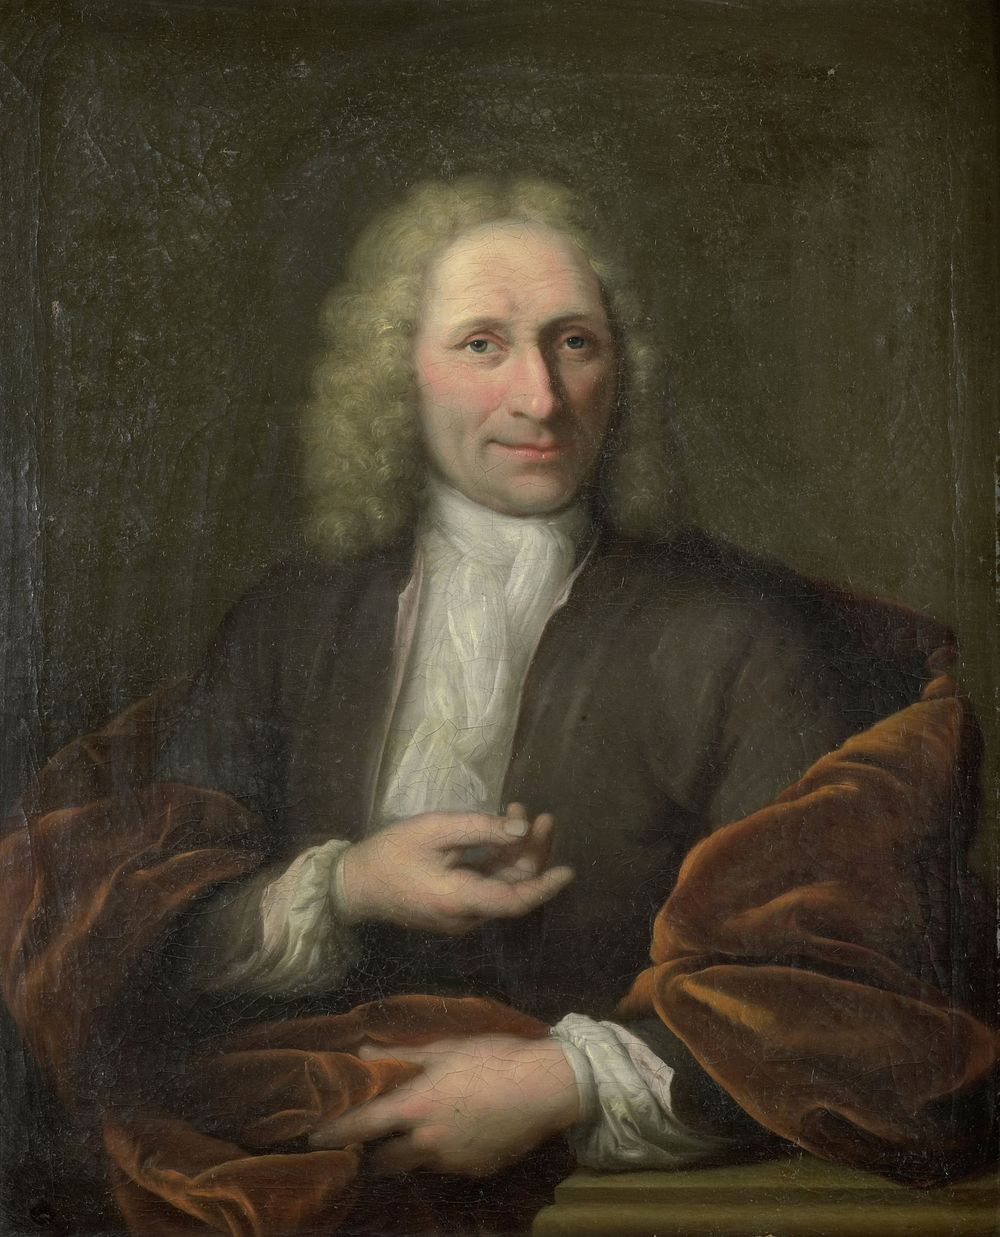 Portrait of a Man (1690 - 1750) by Arnold Boonen